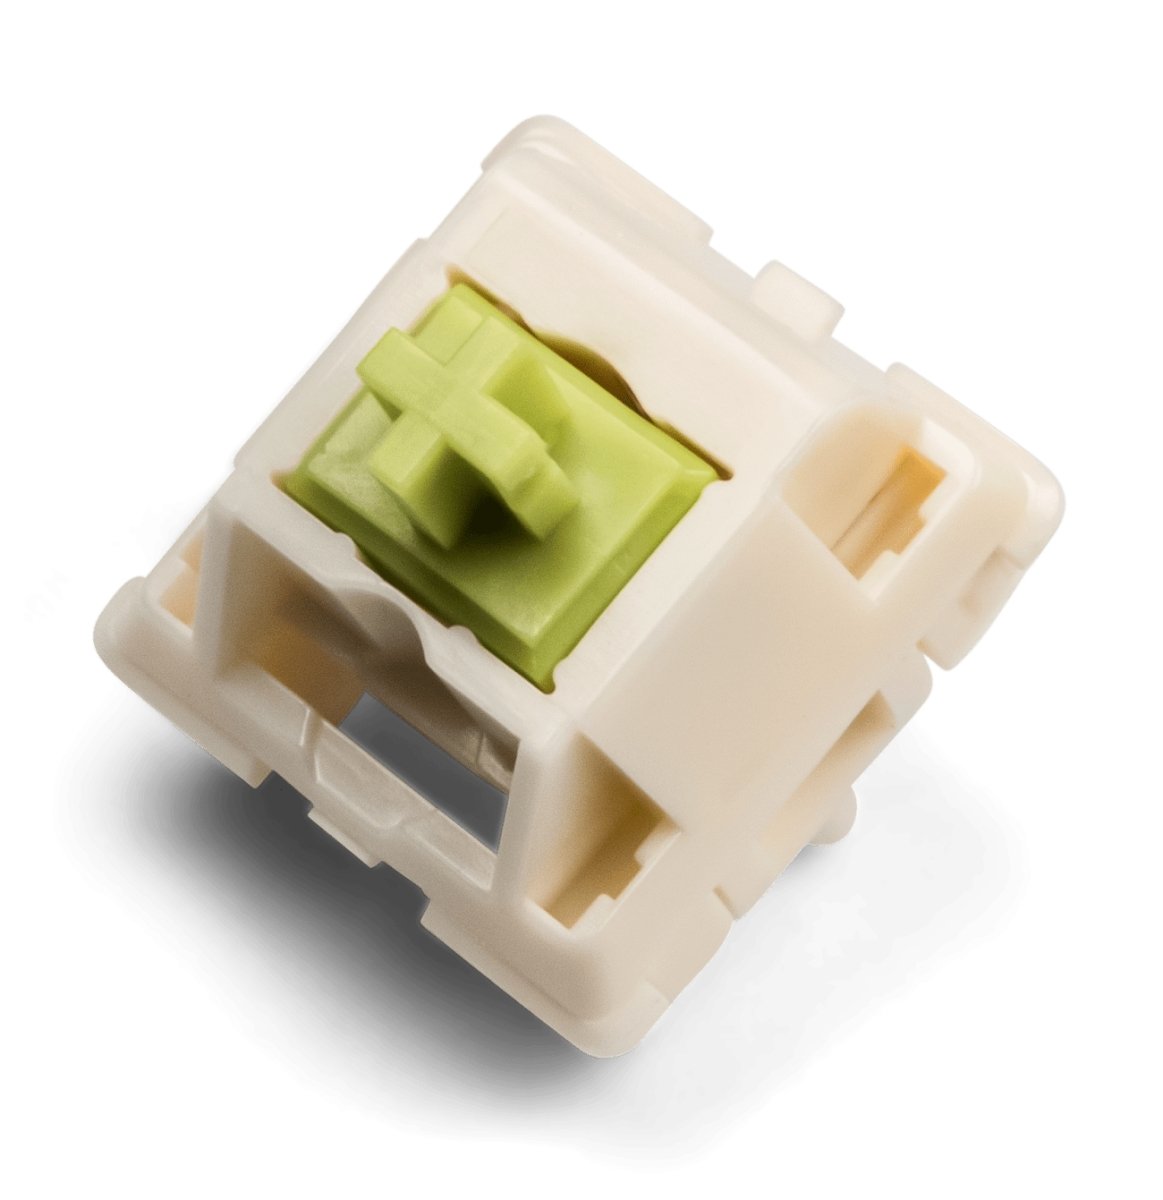 Switch-[Tecsee] Eclair Green Linear Switches - Meow Key